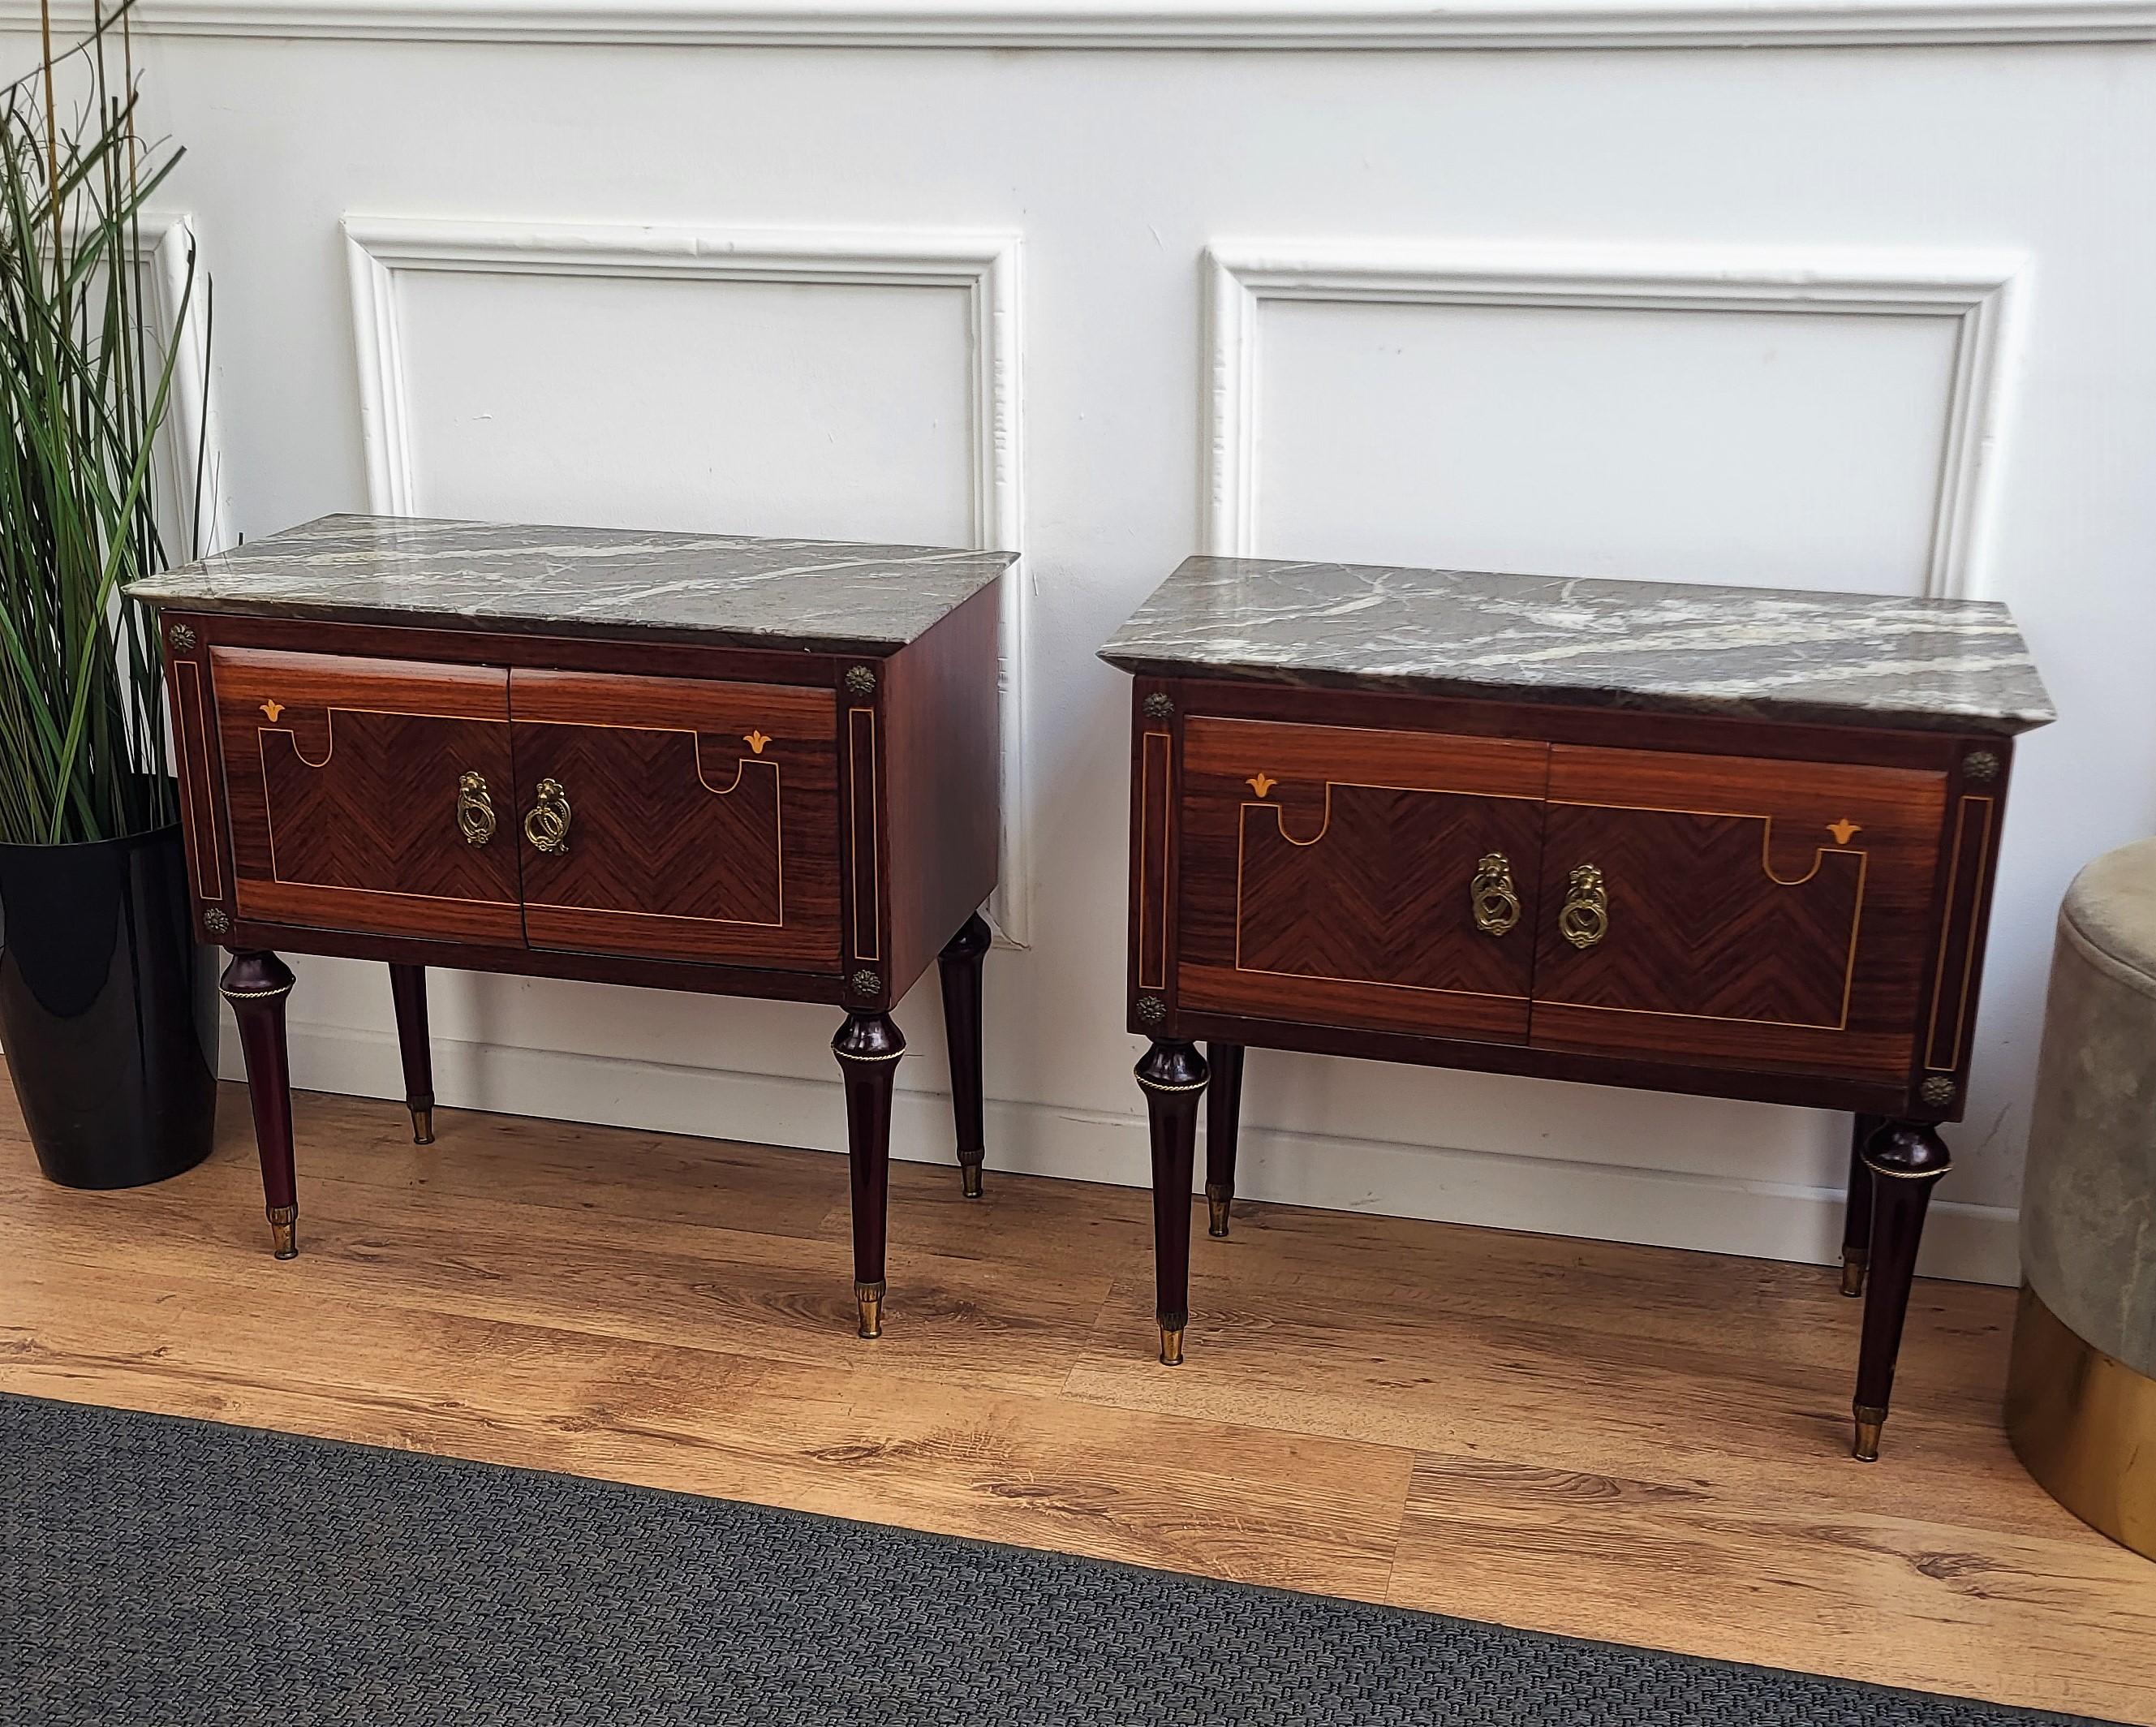 Very elegant and refined Italian 1950s Mid-Century Modern, neoclassical and empire style, in typical Art Deco design, pair of bedside tables with wood double front door, Portoro marble top and inlay decors on the sides and doors, and brass details